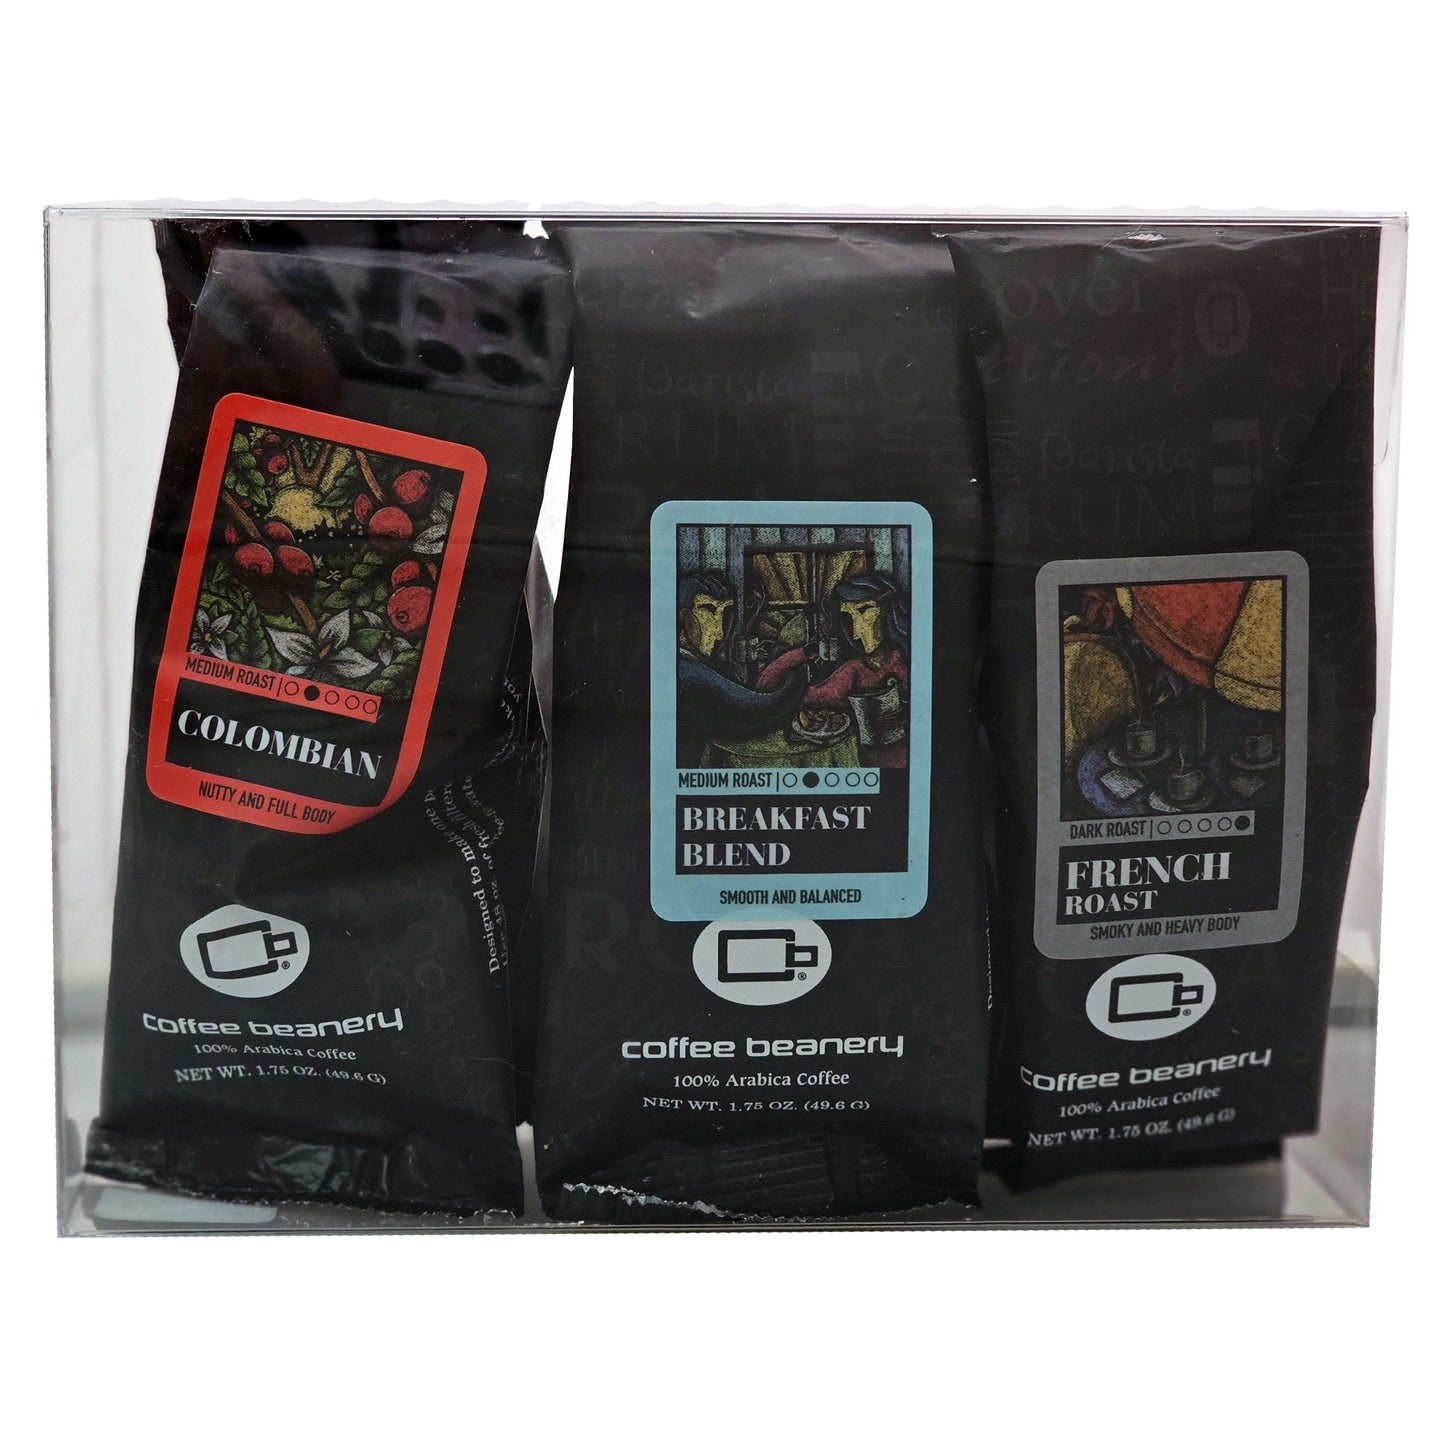 Coffee Beanery Coffee Gift Baskets Specialty Coffee Sampler